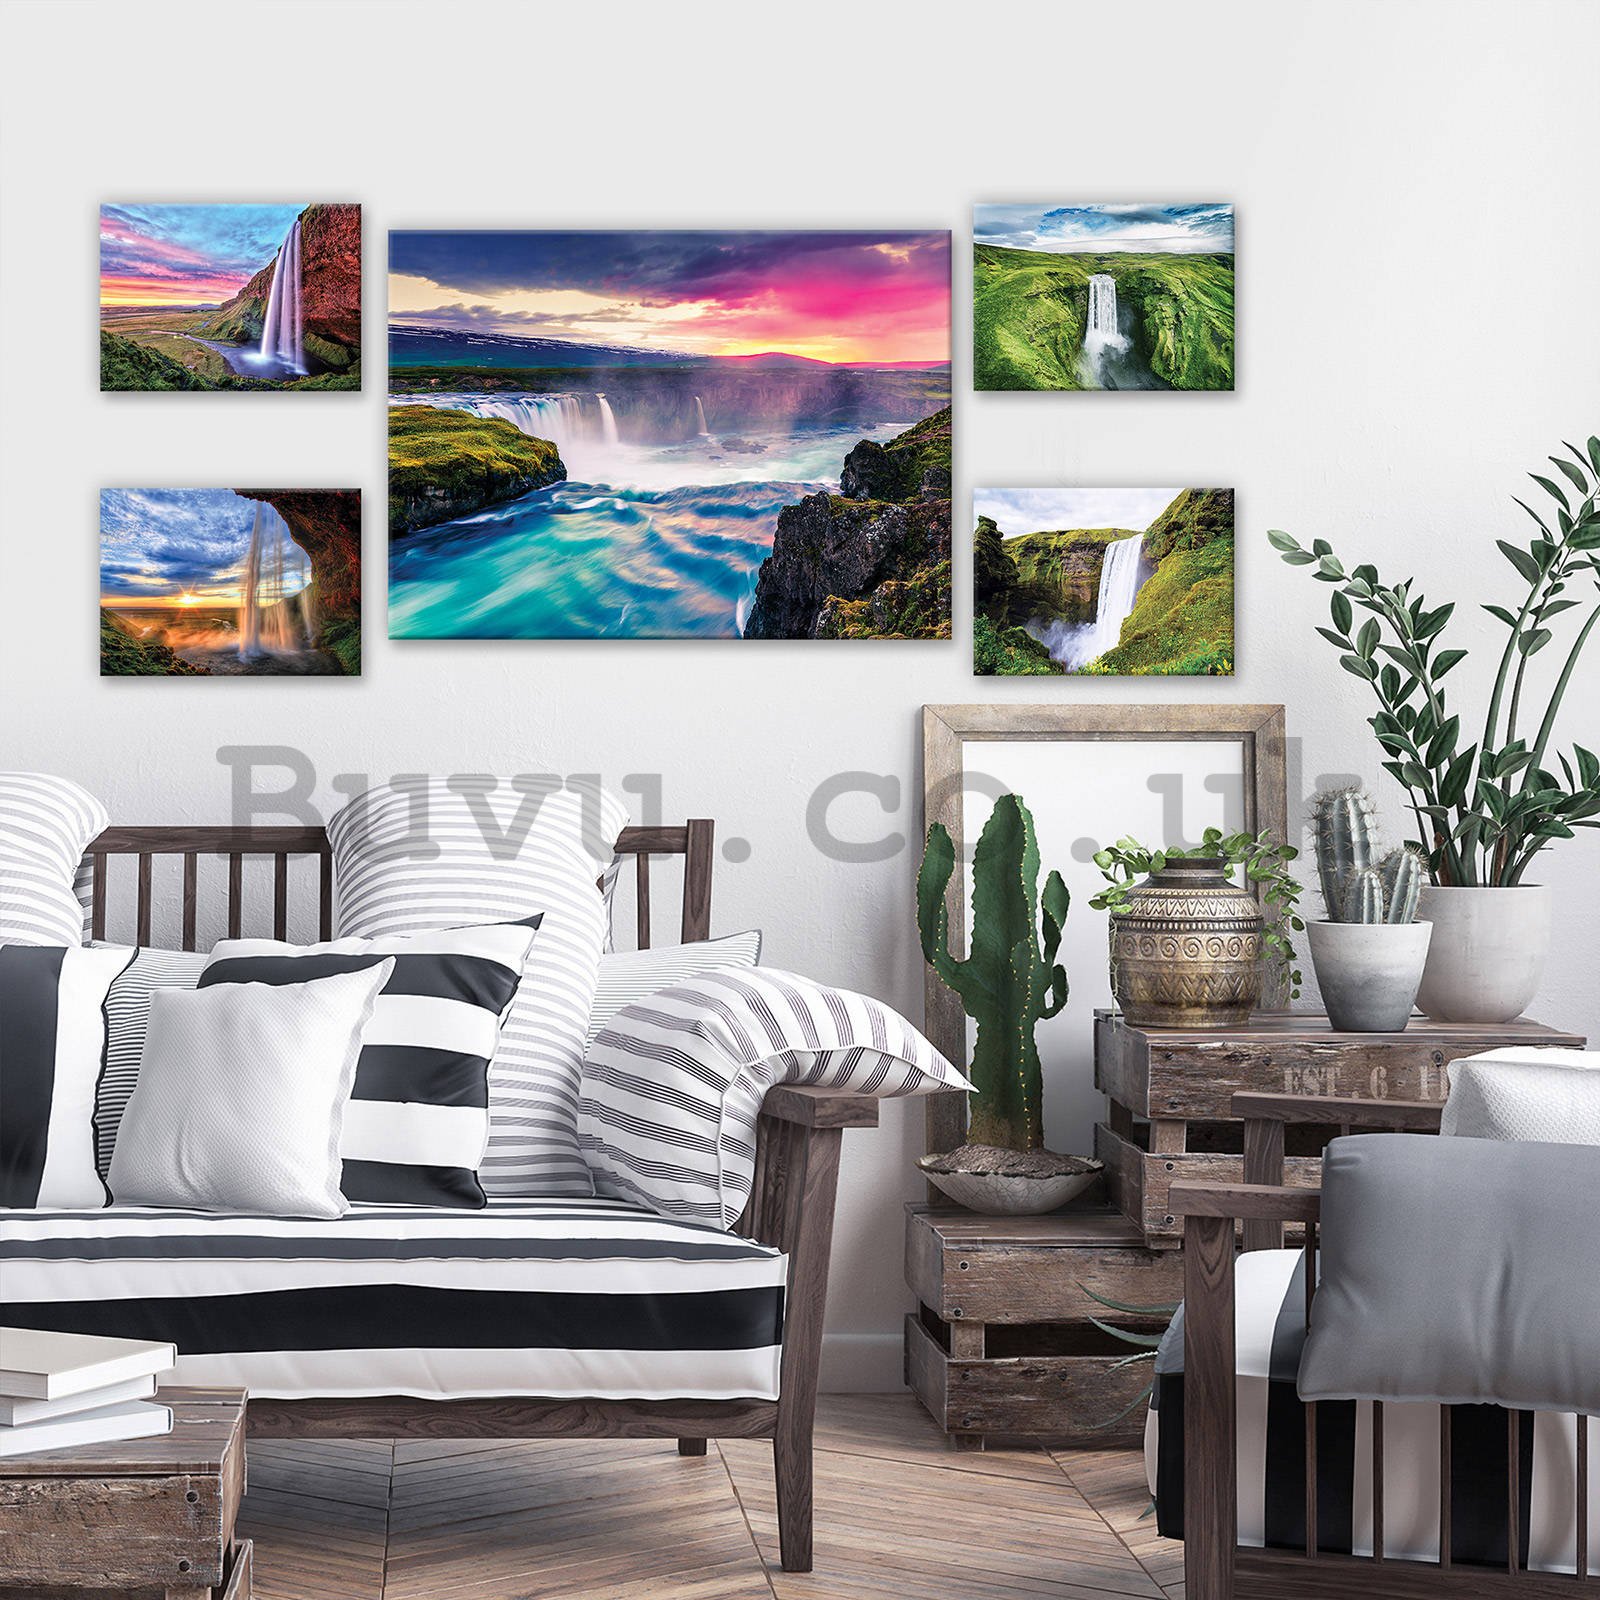 Painting on canvas: Waterfalls at sunrise - set 1pc 70x50 cm and 4pc 32,4x22,8 cm